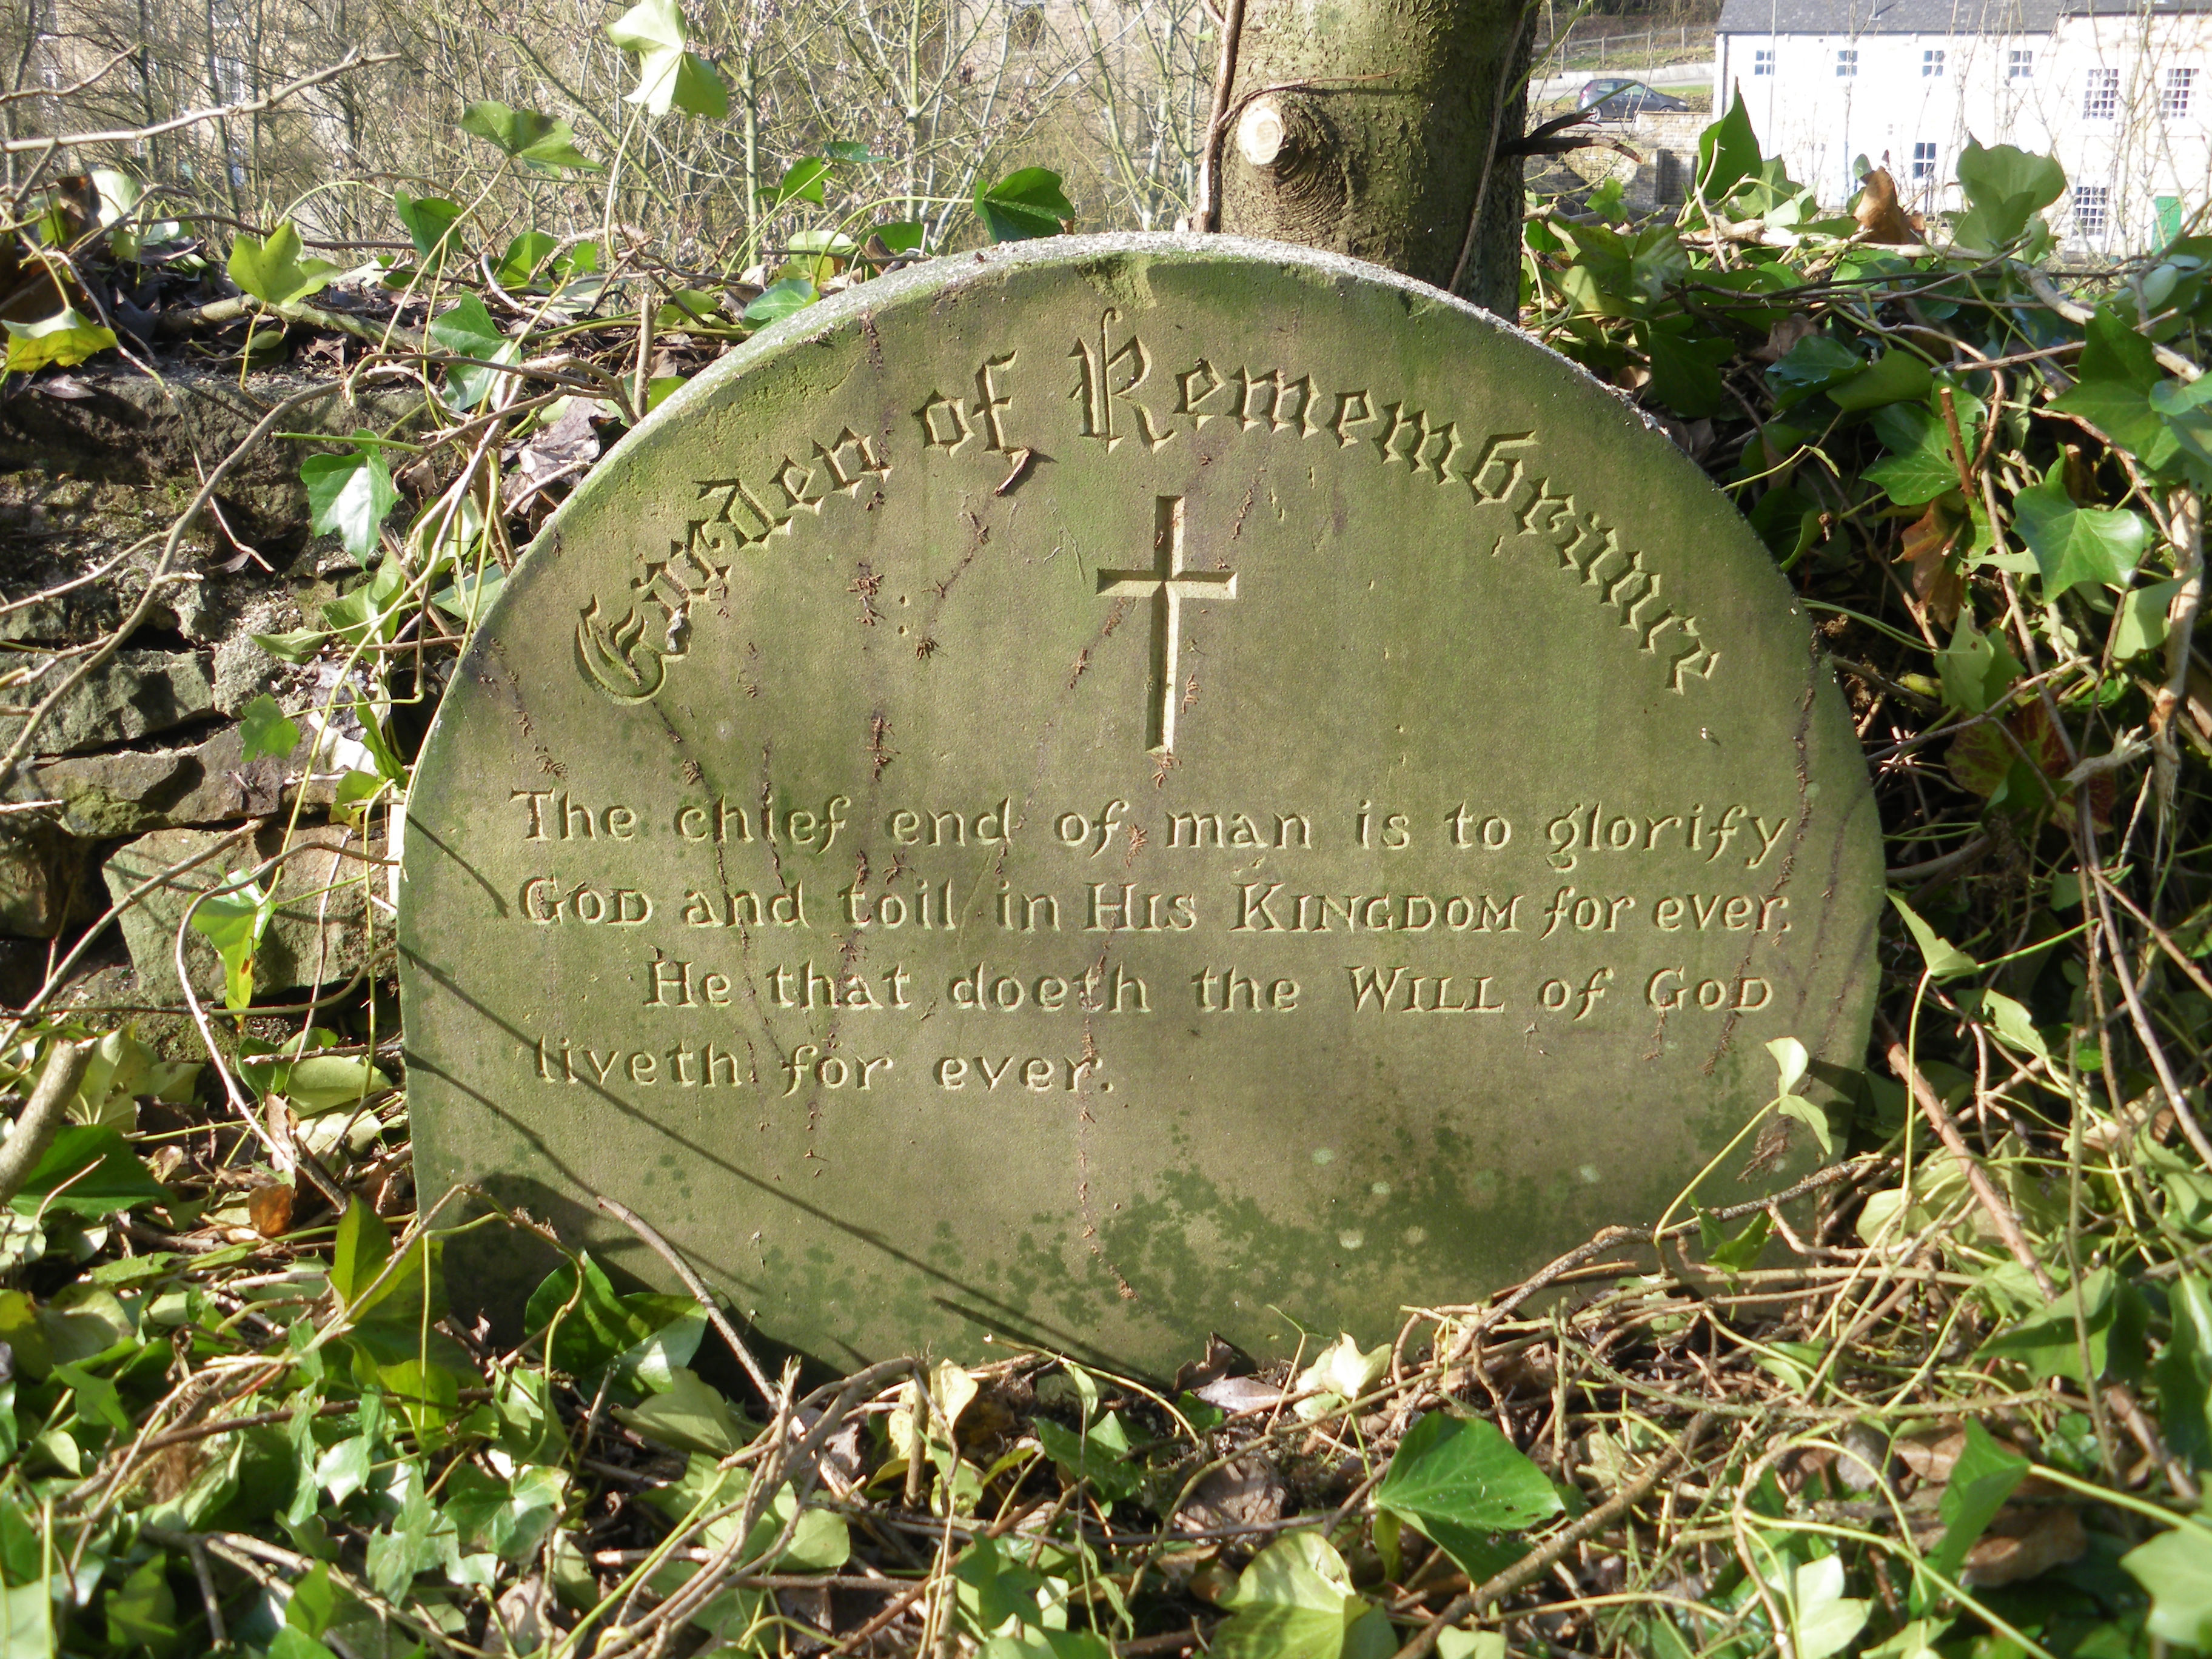 Recent clearing work in the Chapel yard have revealed several interesting memorials